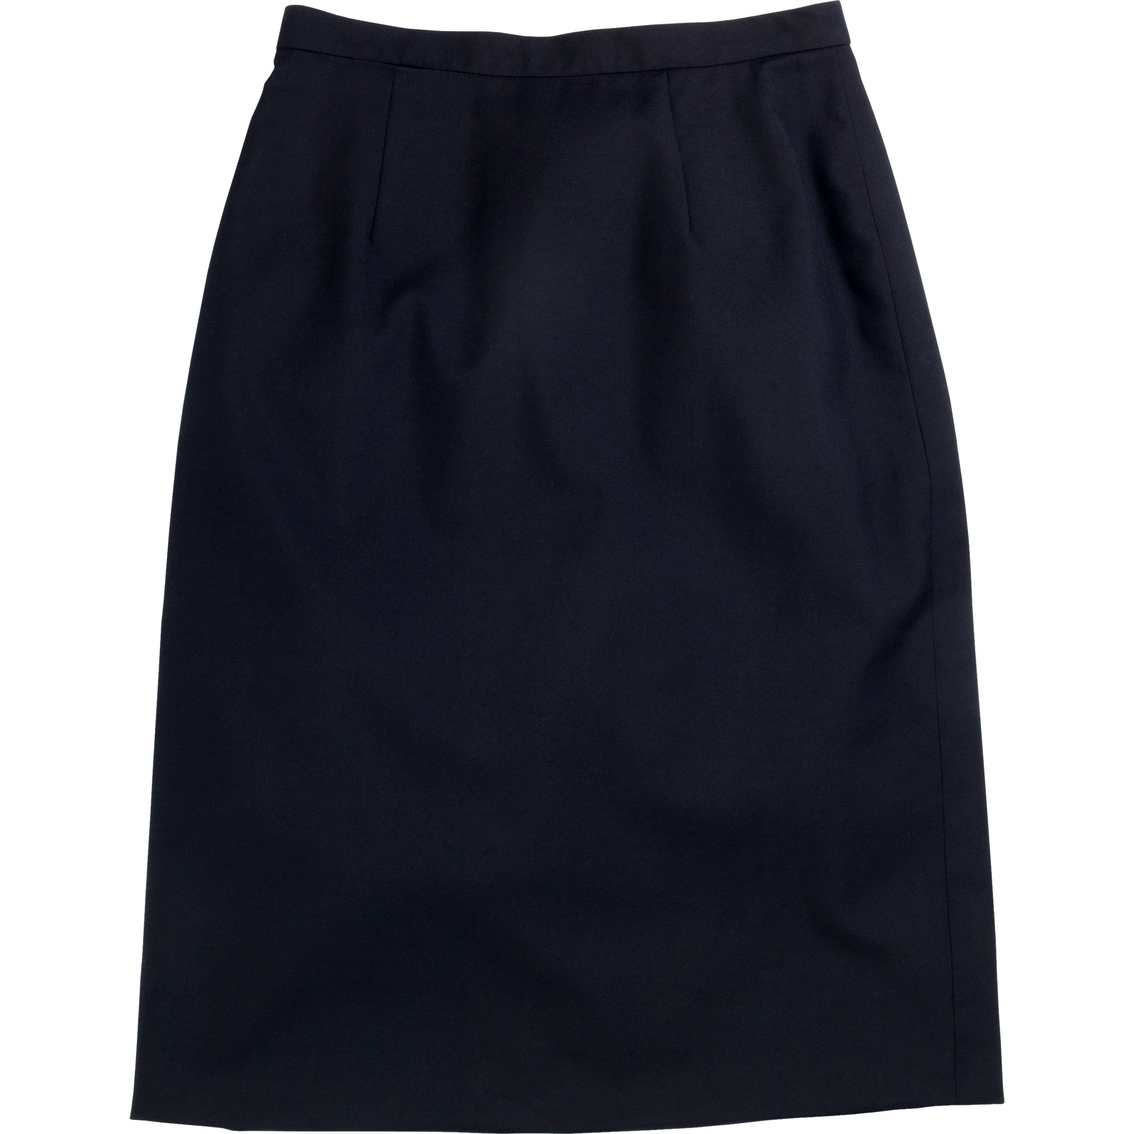 Dlats Enlisted / Officer Asu Dress Skirt Ab450 | Atg Archive | Shop The ...